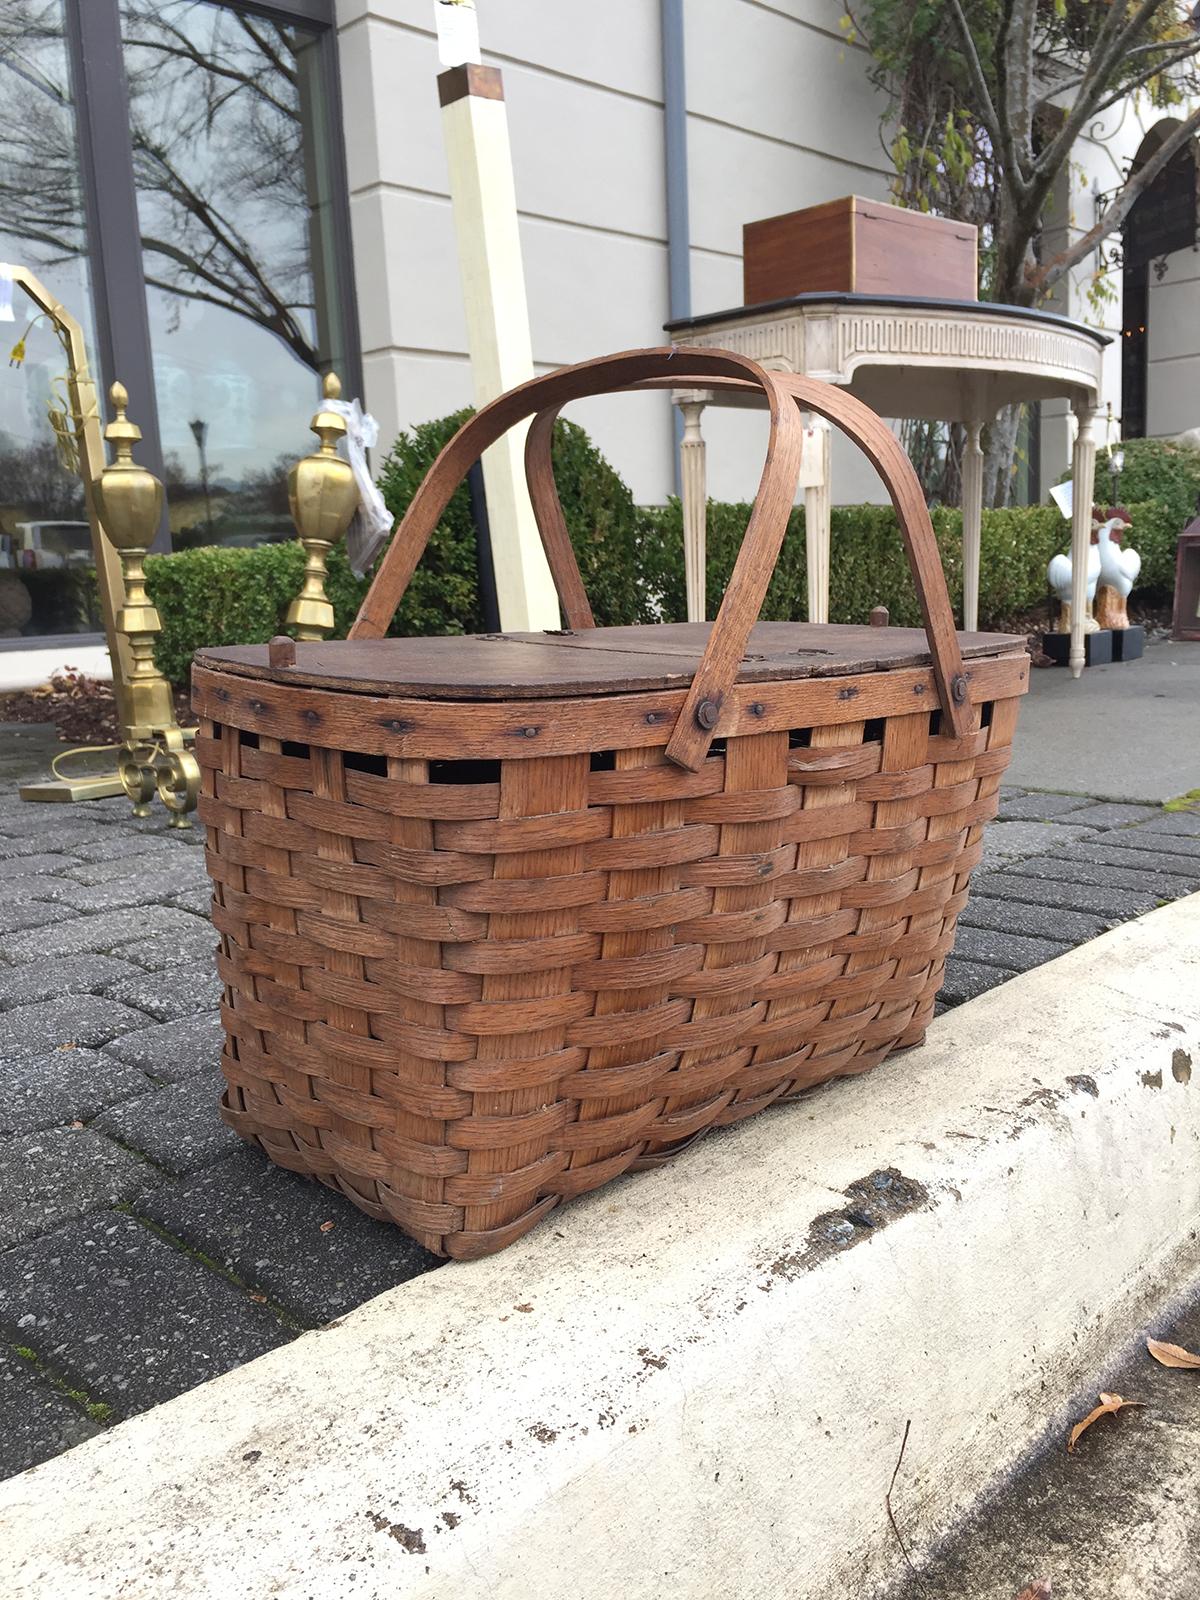 Woven Early 20th Century American Picnic Basket